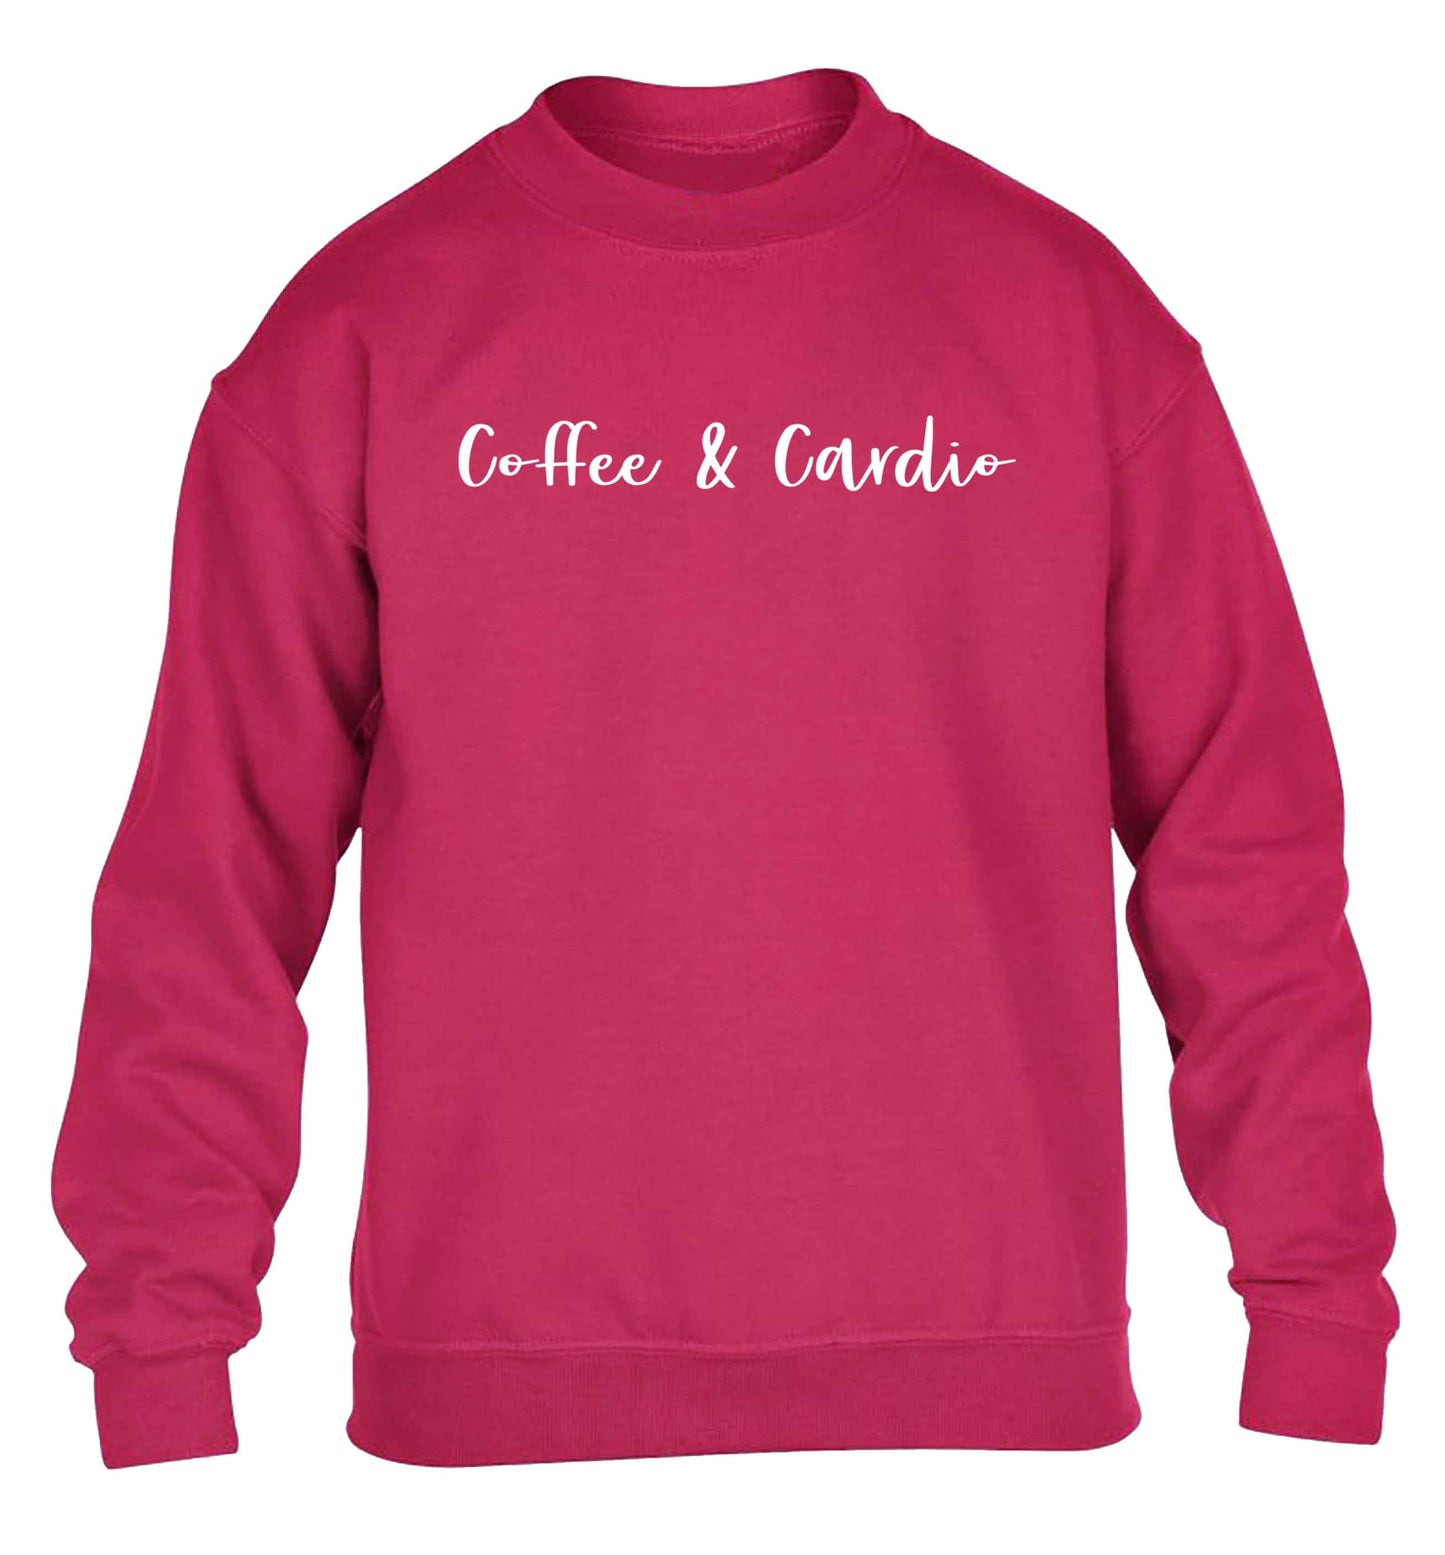 Coffee and cardio children's pink sweater 12-13 Years